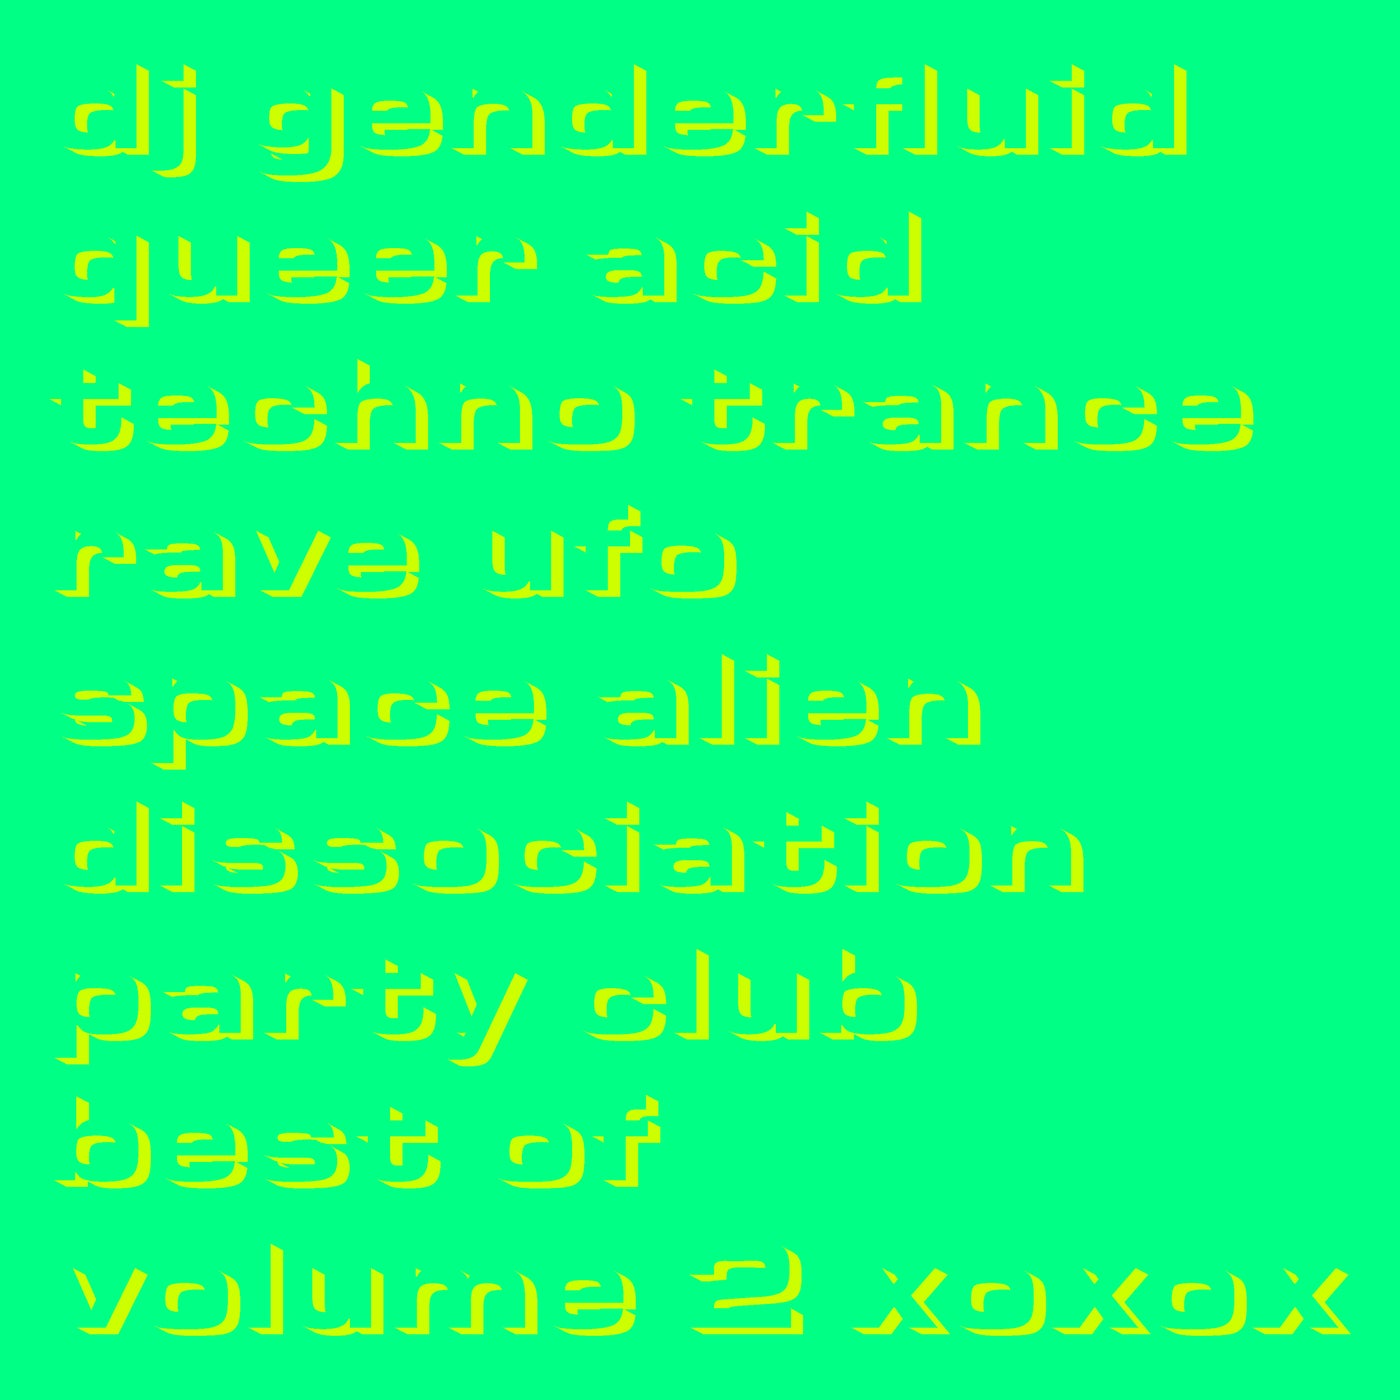 queer acid techno trance rave ufo space alien dissociation party club best of volume 2 xoxox